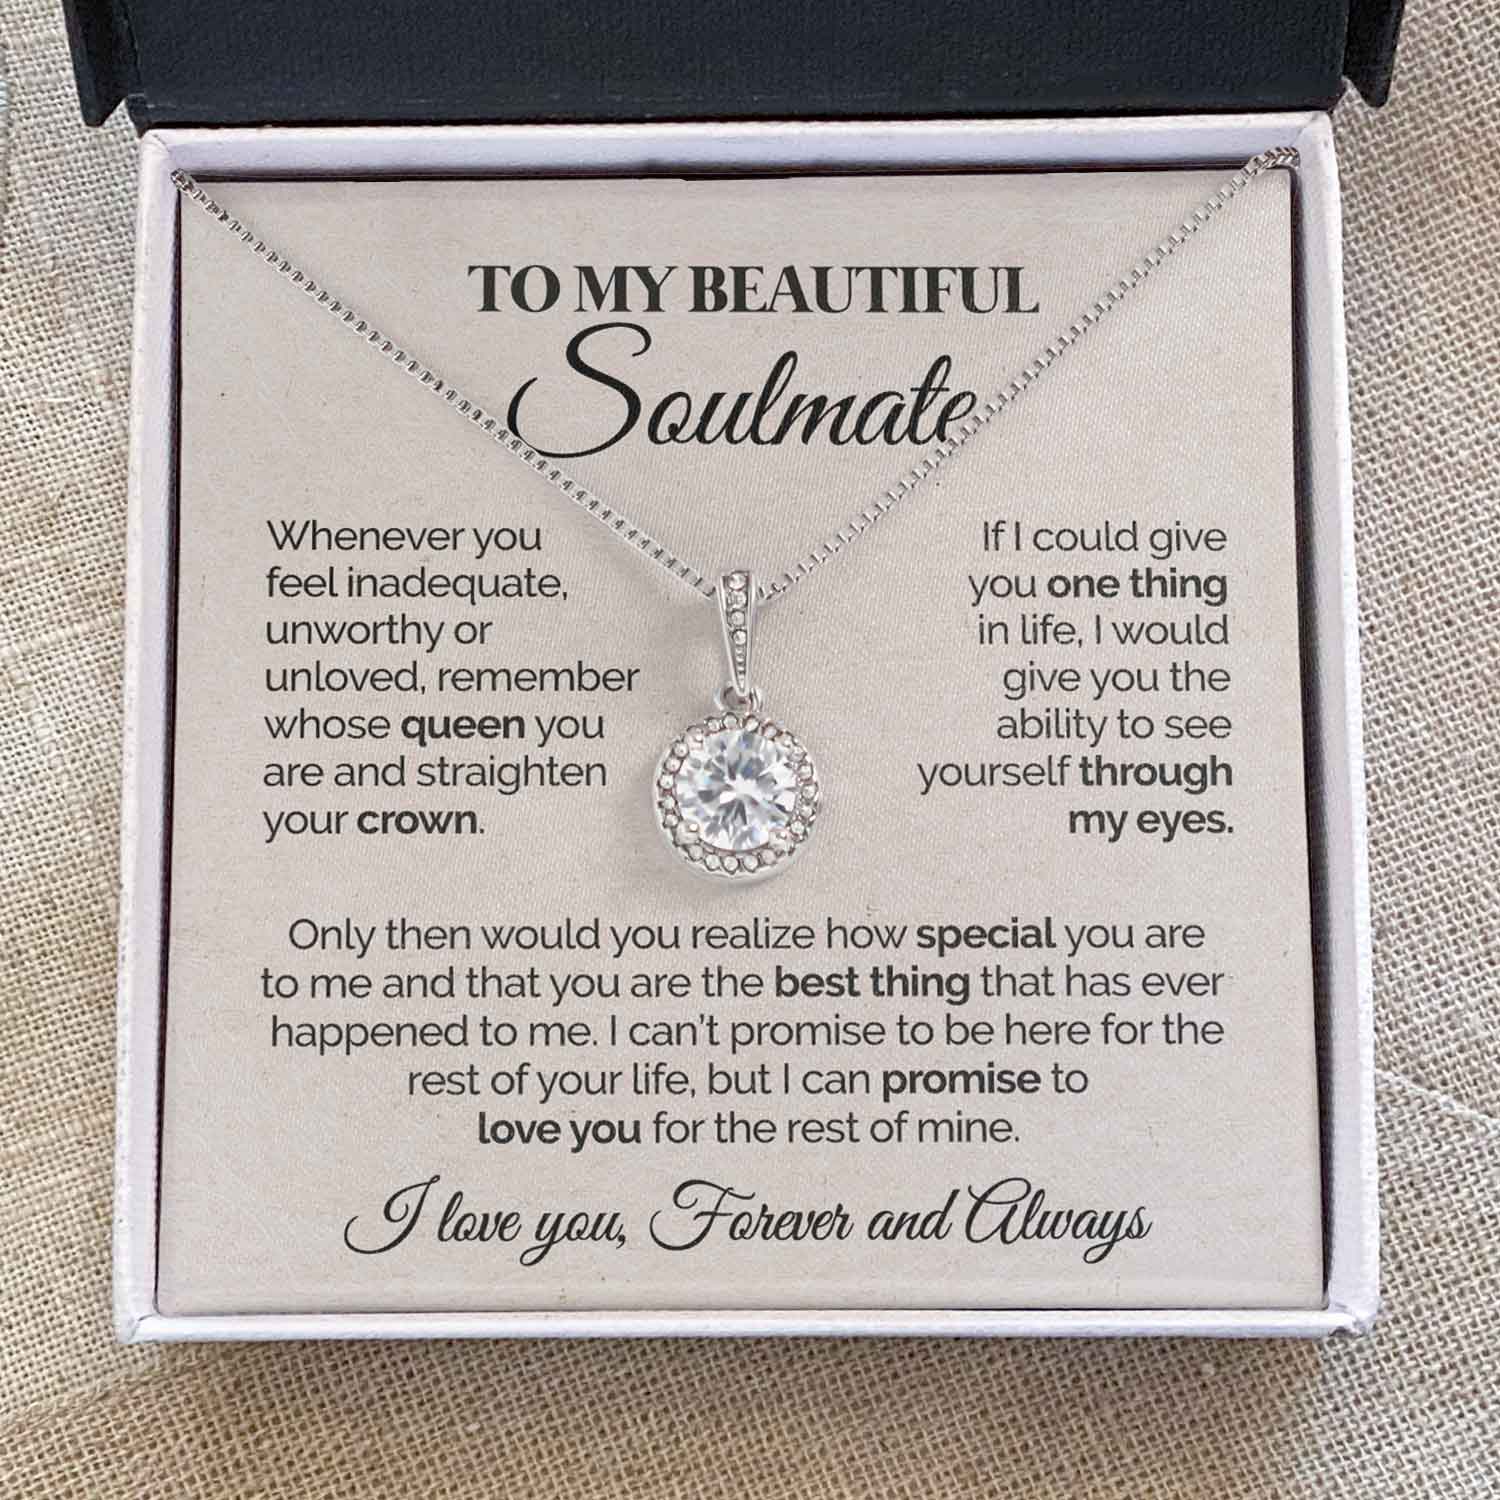 ShineOn Fulfillment Jewelry Mahogany Style Luxury Box To My Beautiful Soulmate - Remember Whose Queen You Are - Eternal Hope Necklace